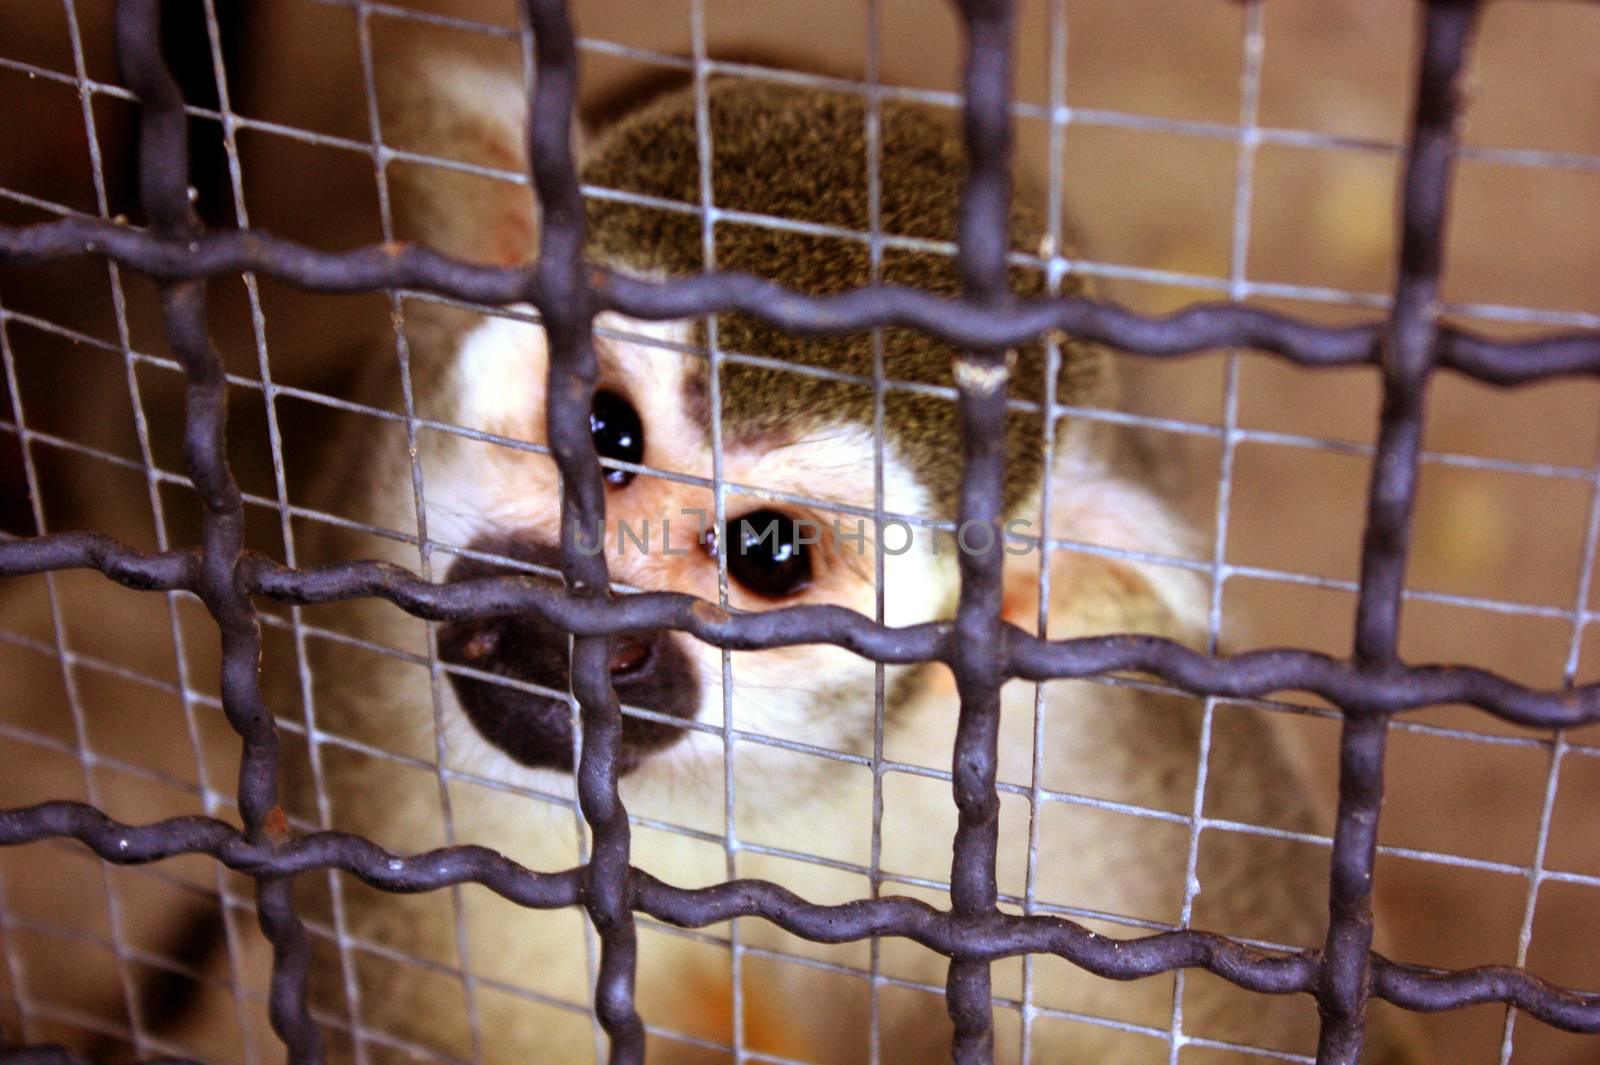 Poor eyes of the little monkey in a cage. Problems of wildlife trafficking.